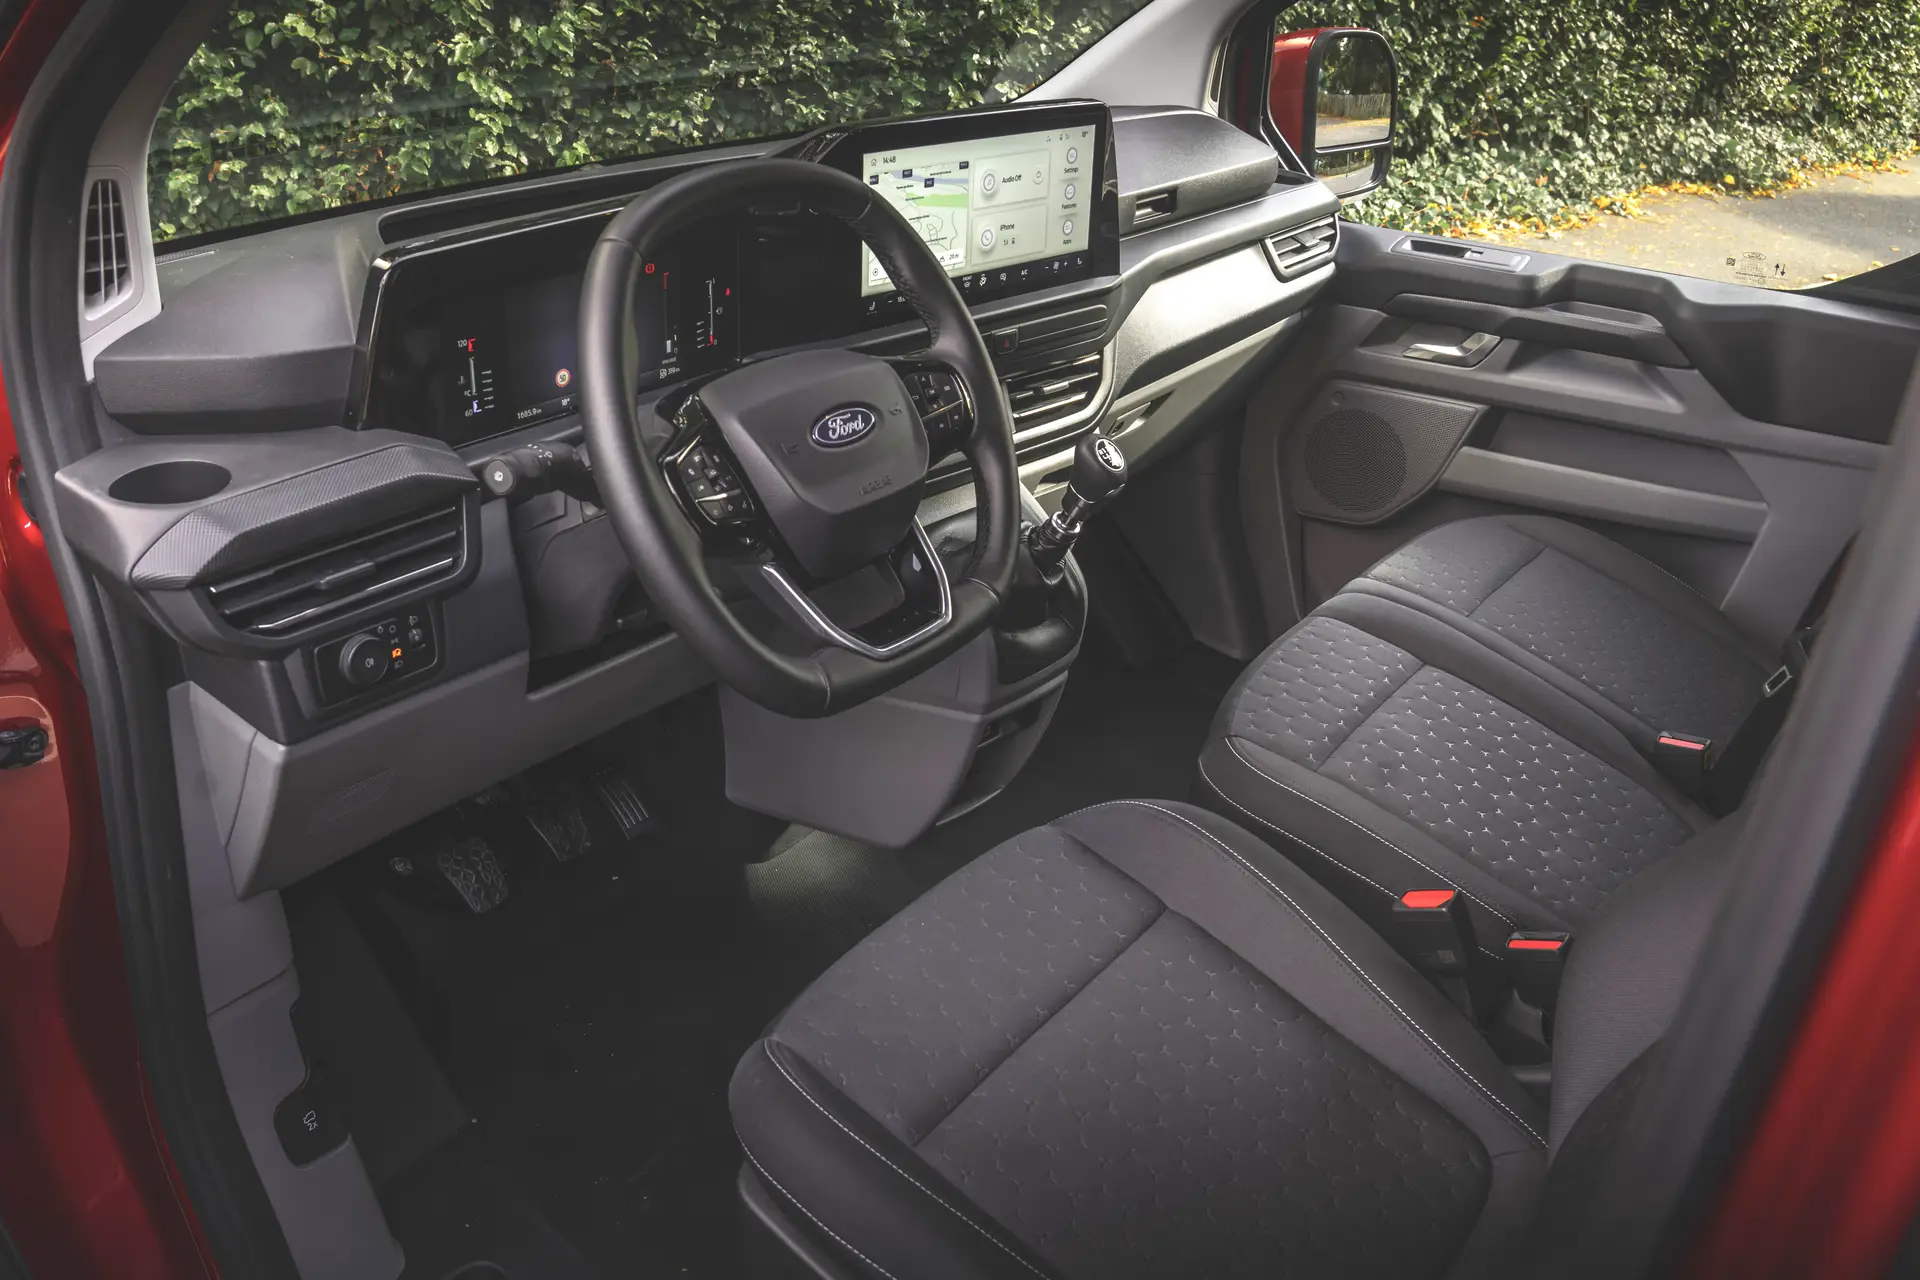 Ford Transit Custom Review: cabin interior